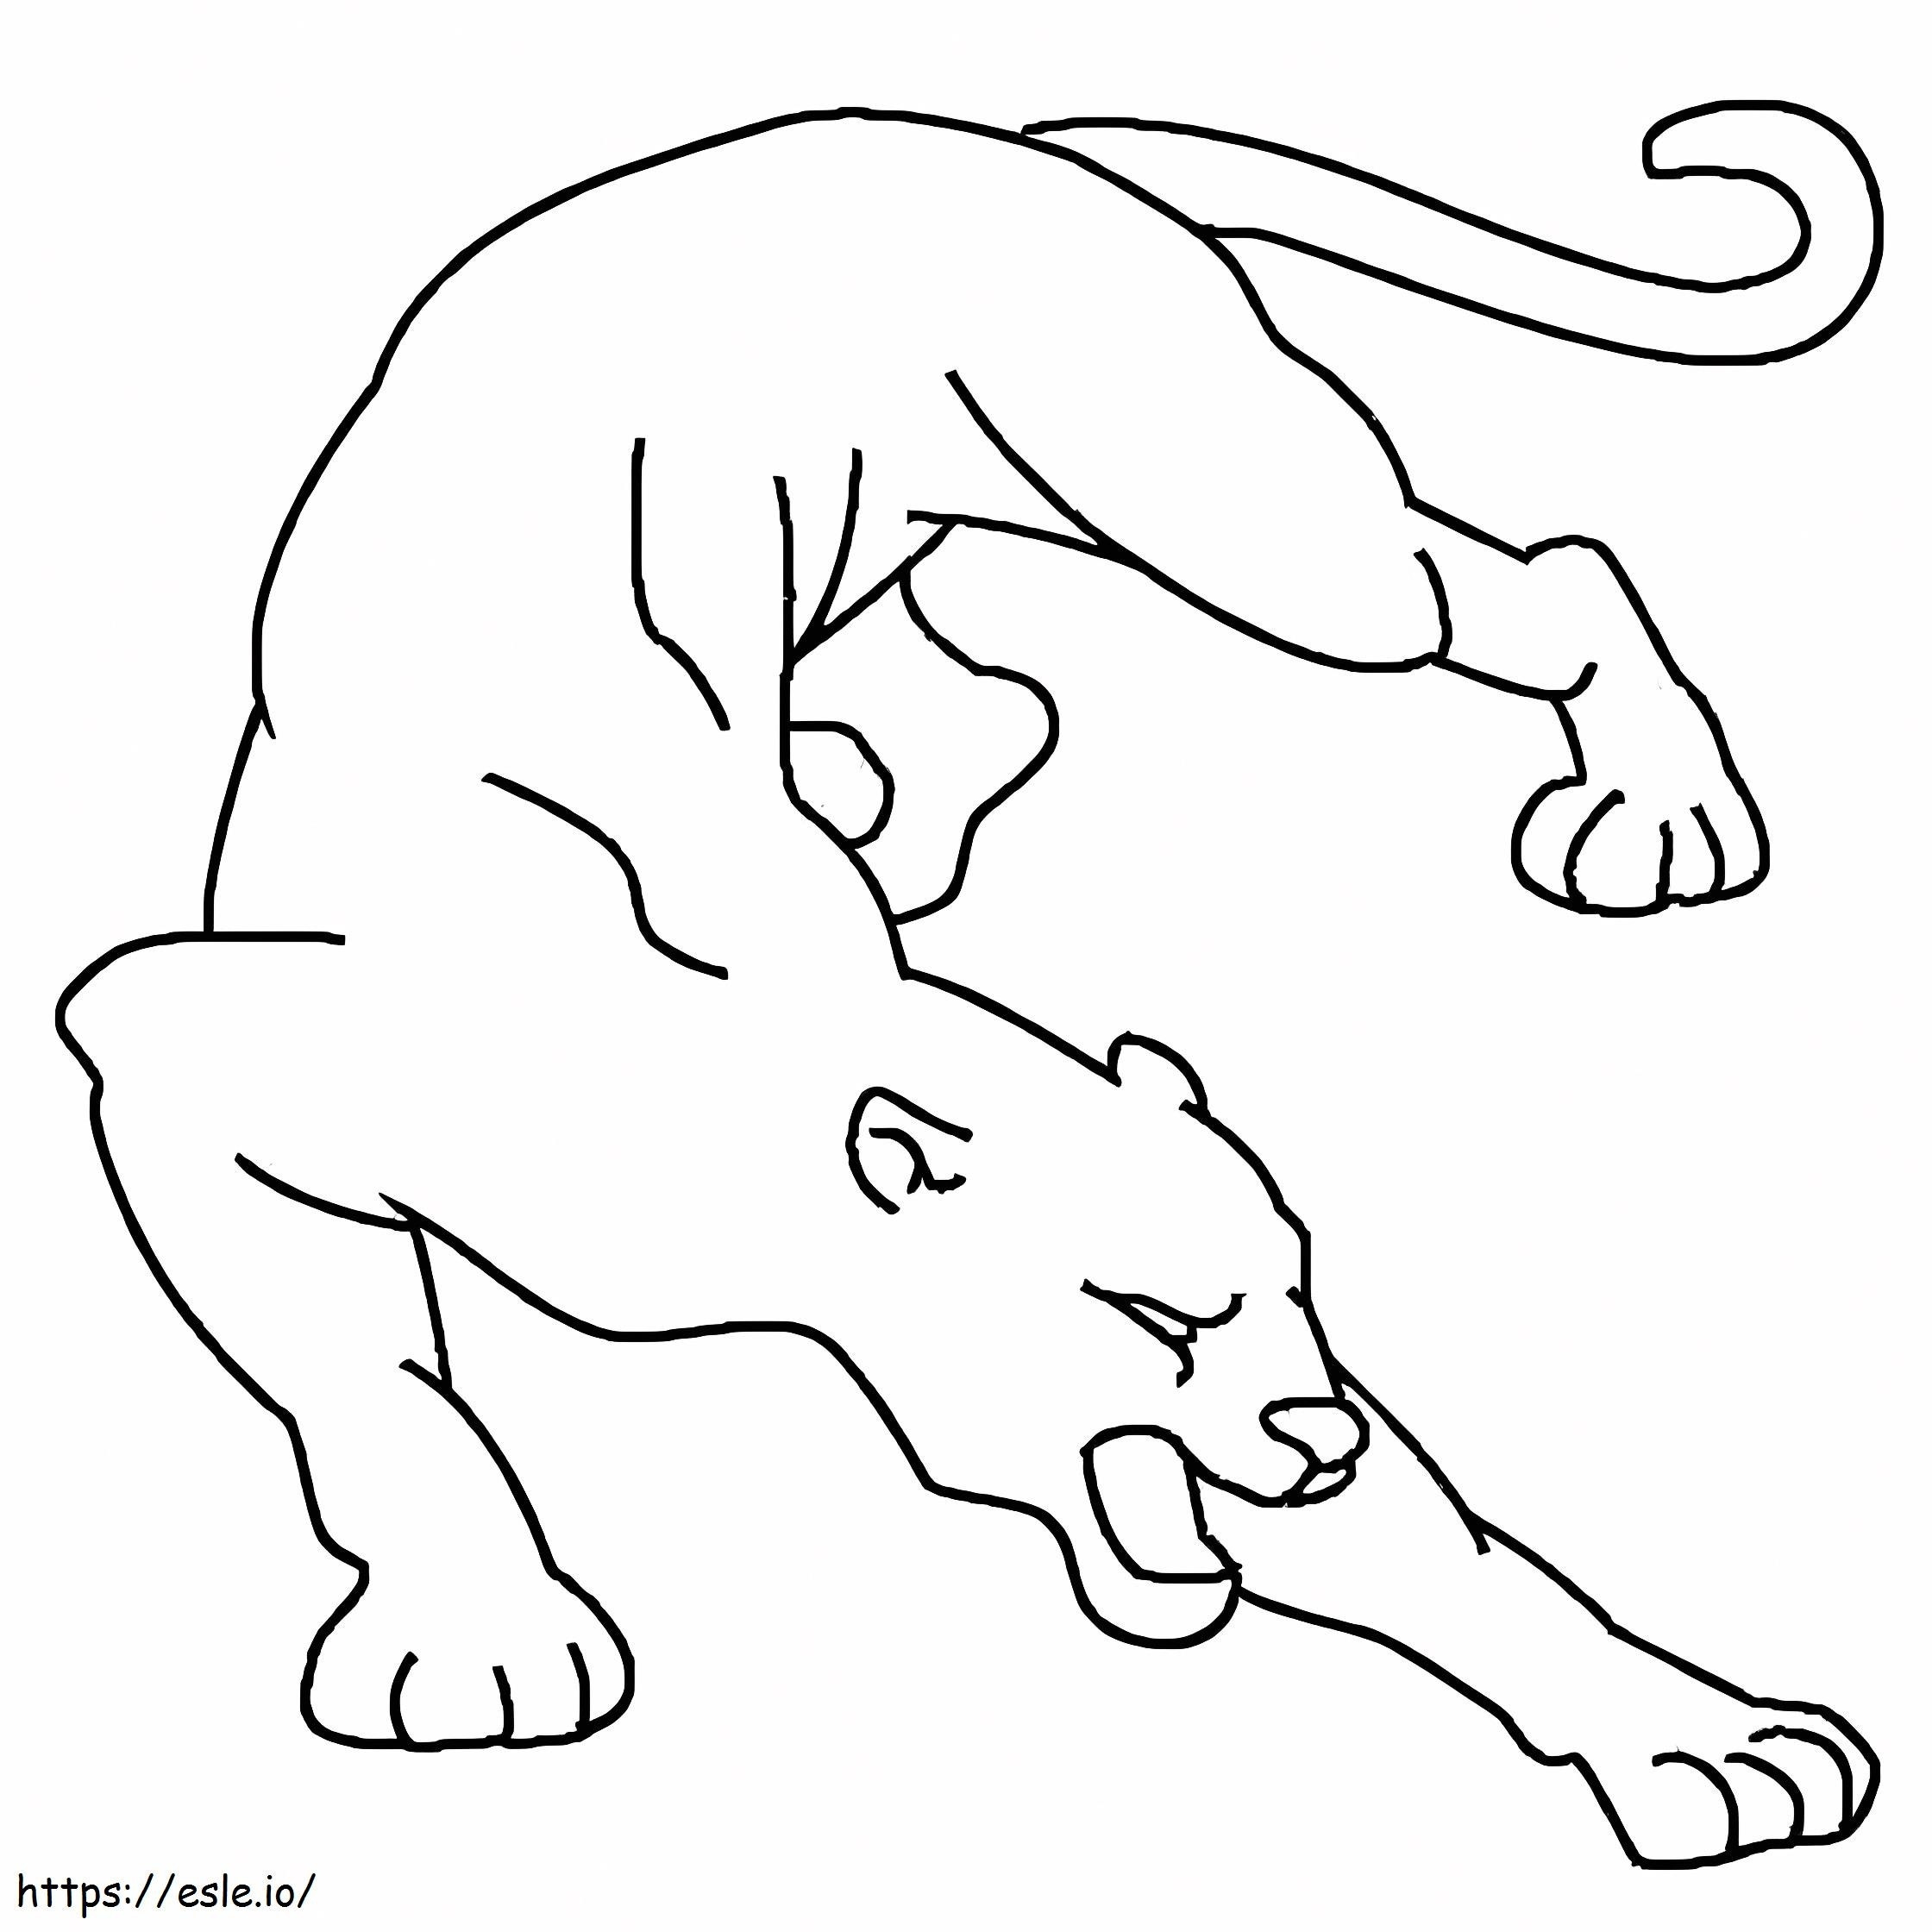 Basic Cougar coloring page